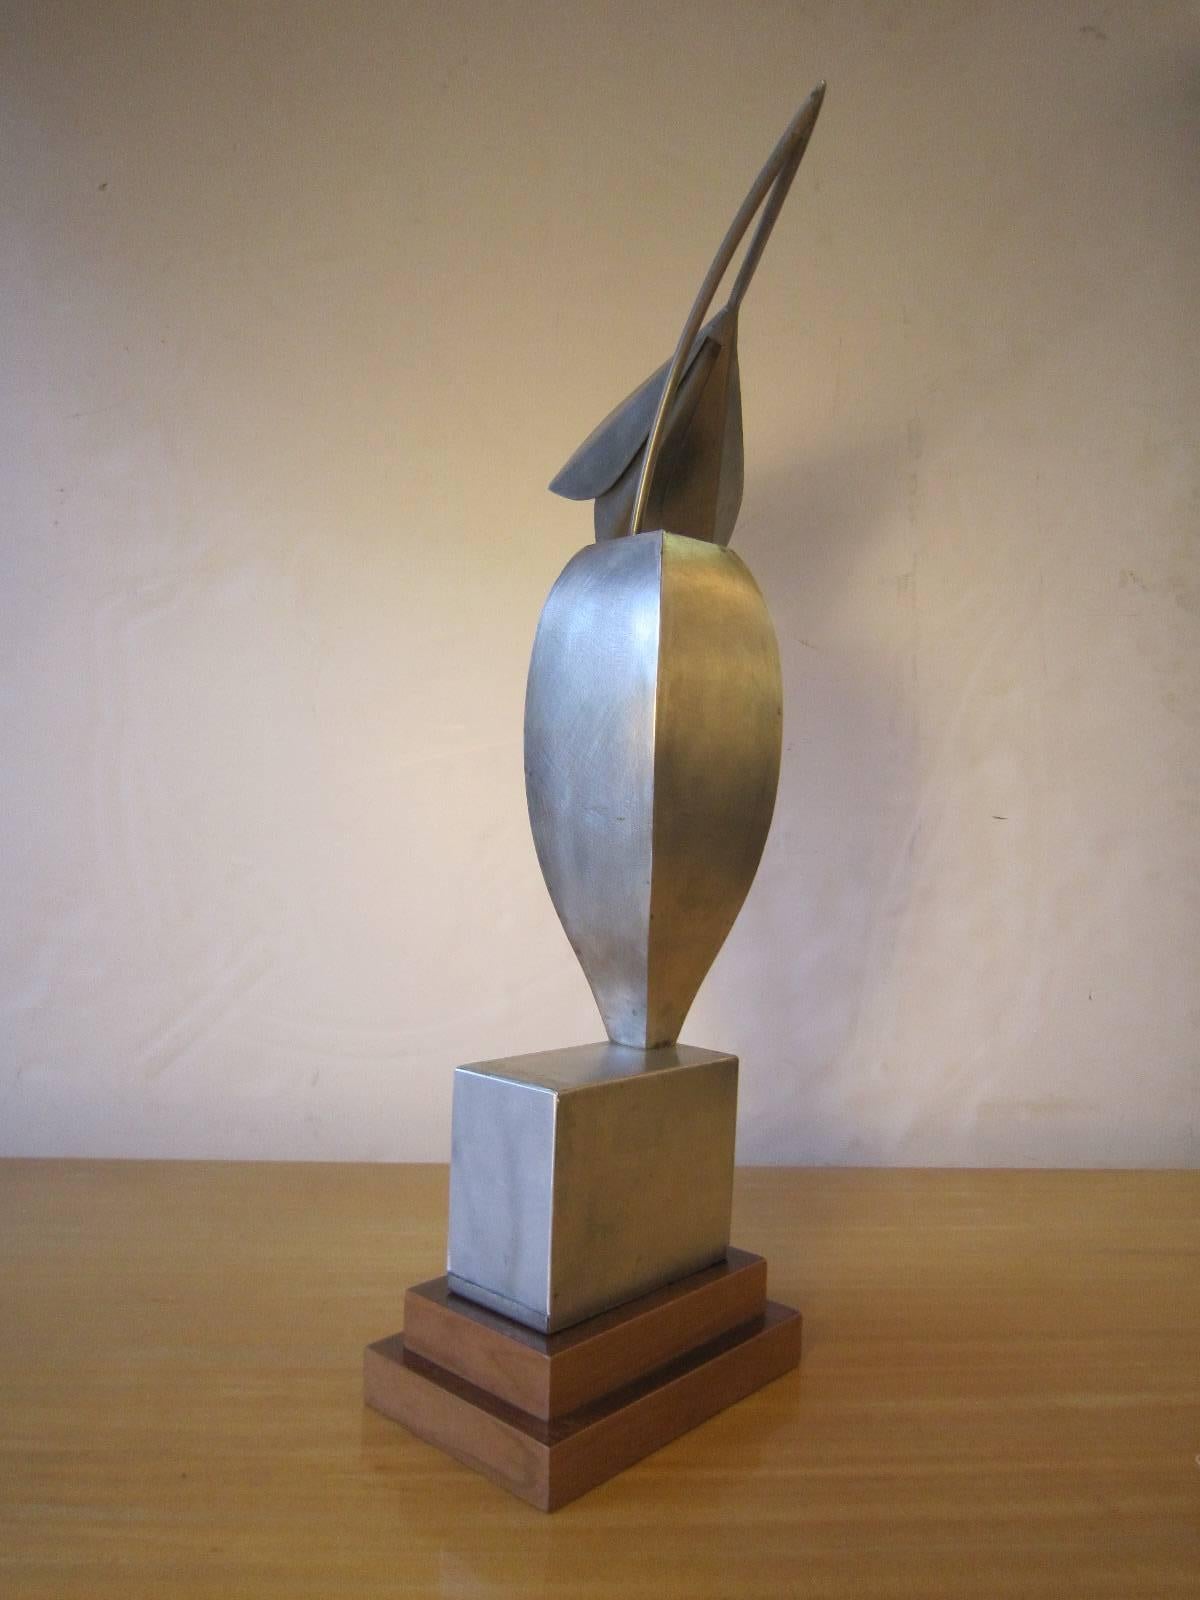 Unusual Modernist statue of a highly stylized bird on stepped wood base.
Using elements from nature, this work of art portrays Dual semblance as an animal and as a vessel or flower vase. The artist exudes in his sculpture simplicity of form. His